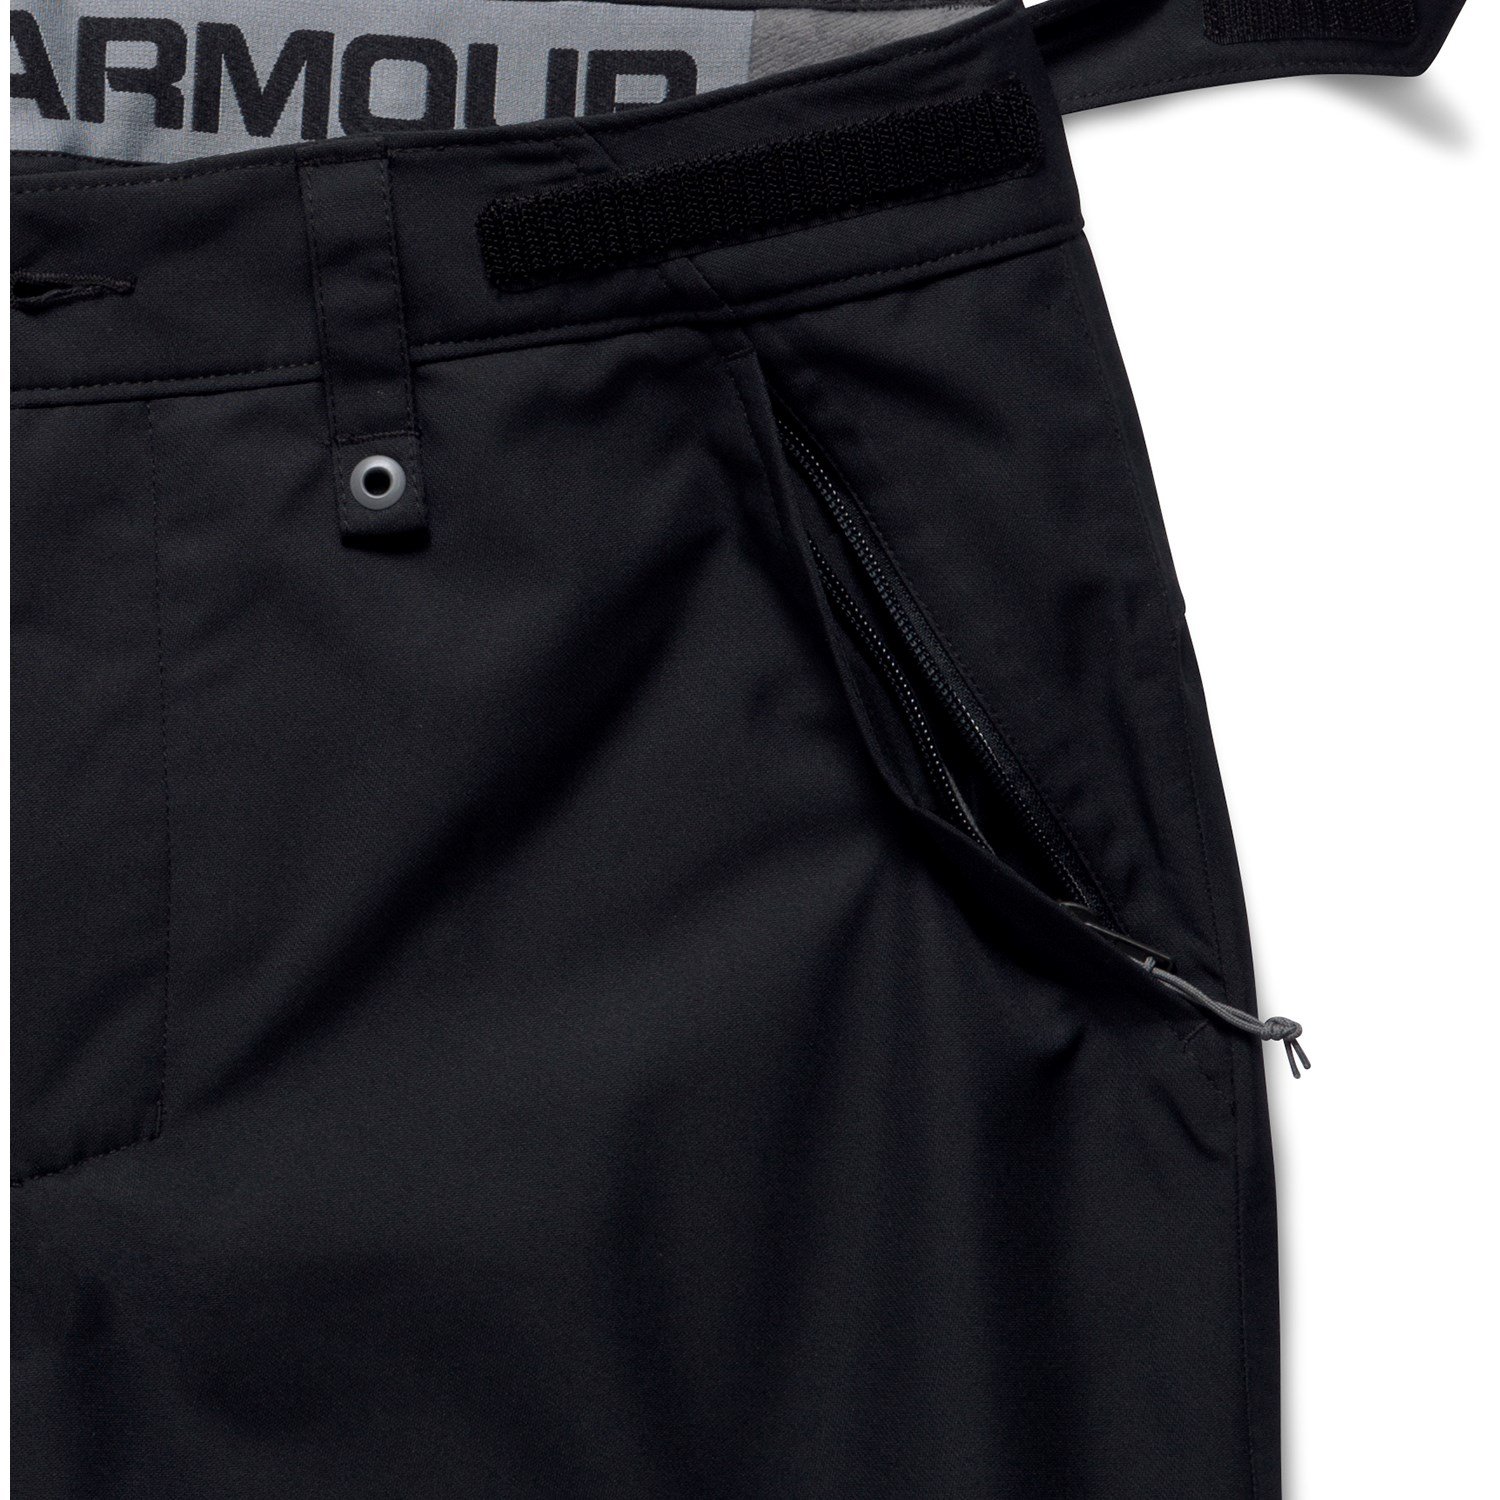 under armour sticks and stones pants